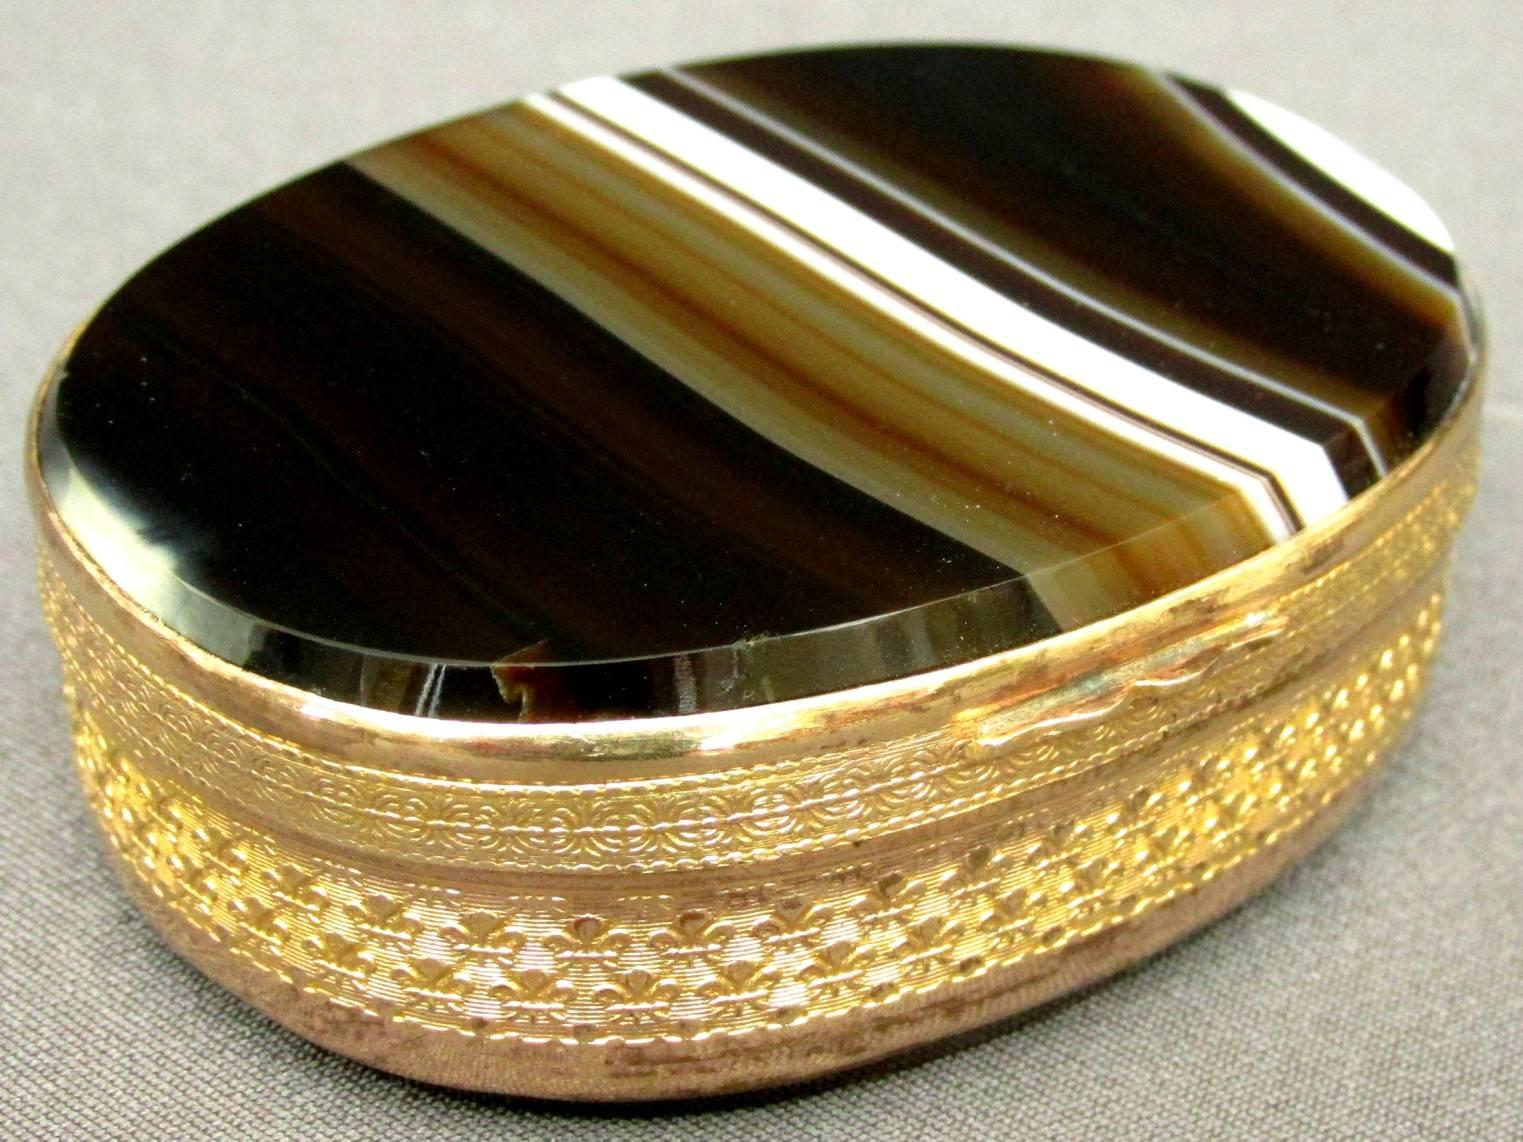 The large and hinged gilt metal oval body having a running band of embossed thistle motifs, encasing two conforming agate panels with graduated white and brown striations.
